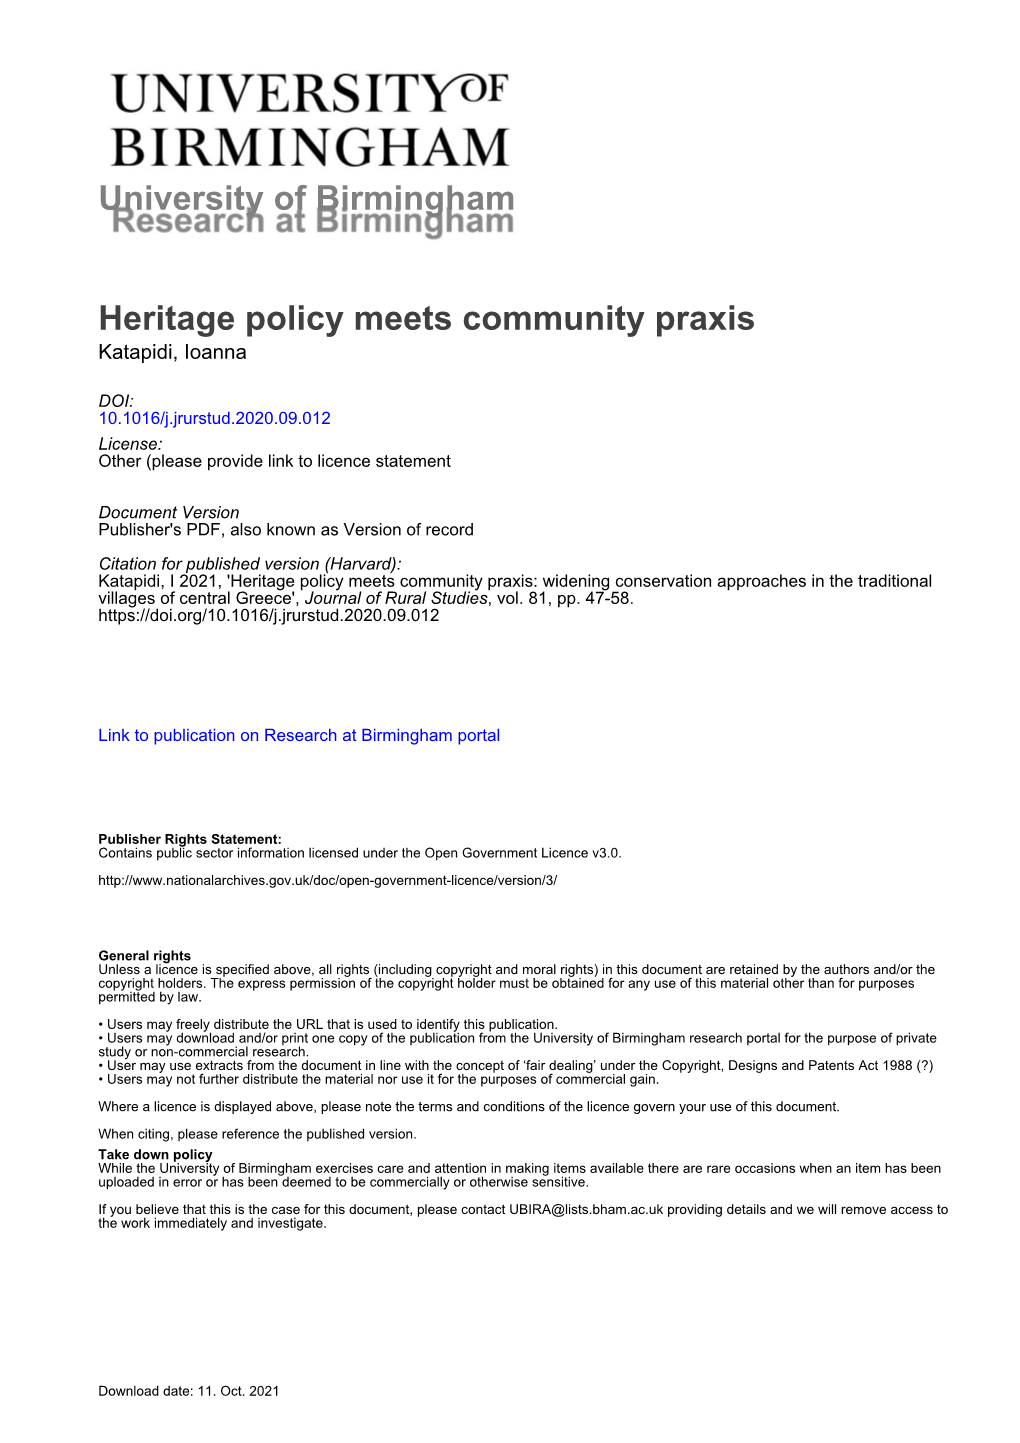 Heritage Policy Meets Community Praxis: Widening Conservation Approaches in the Traditional Villages of Central Greece', Journal of Rural Studies, Vol